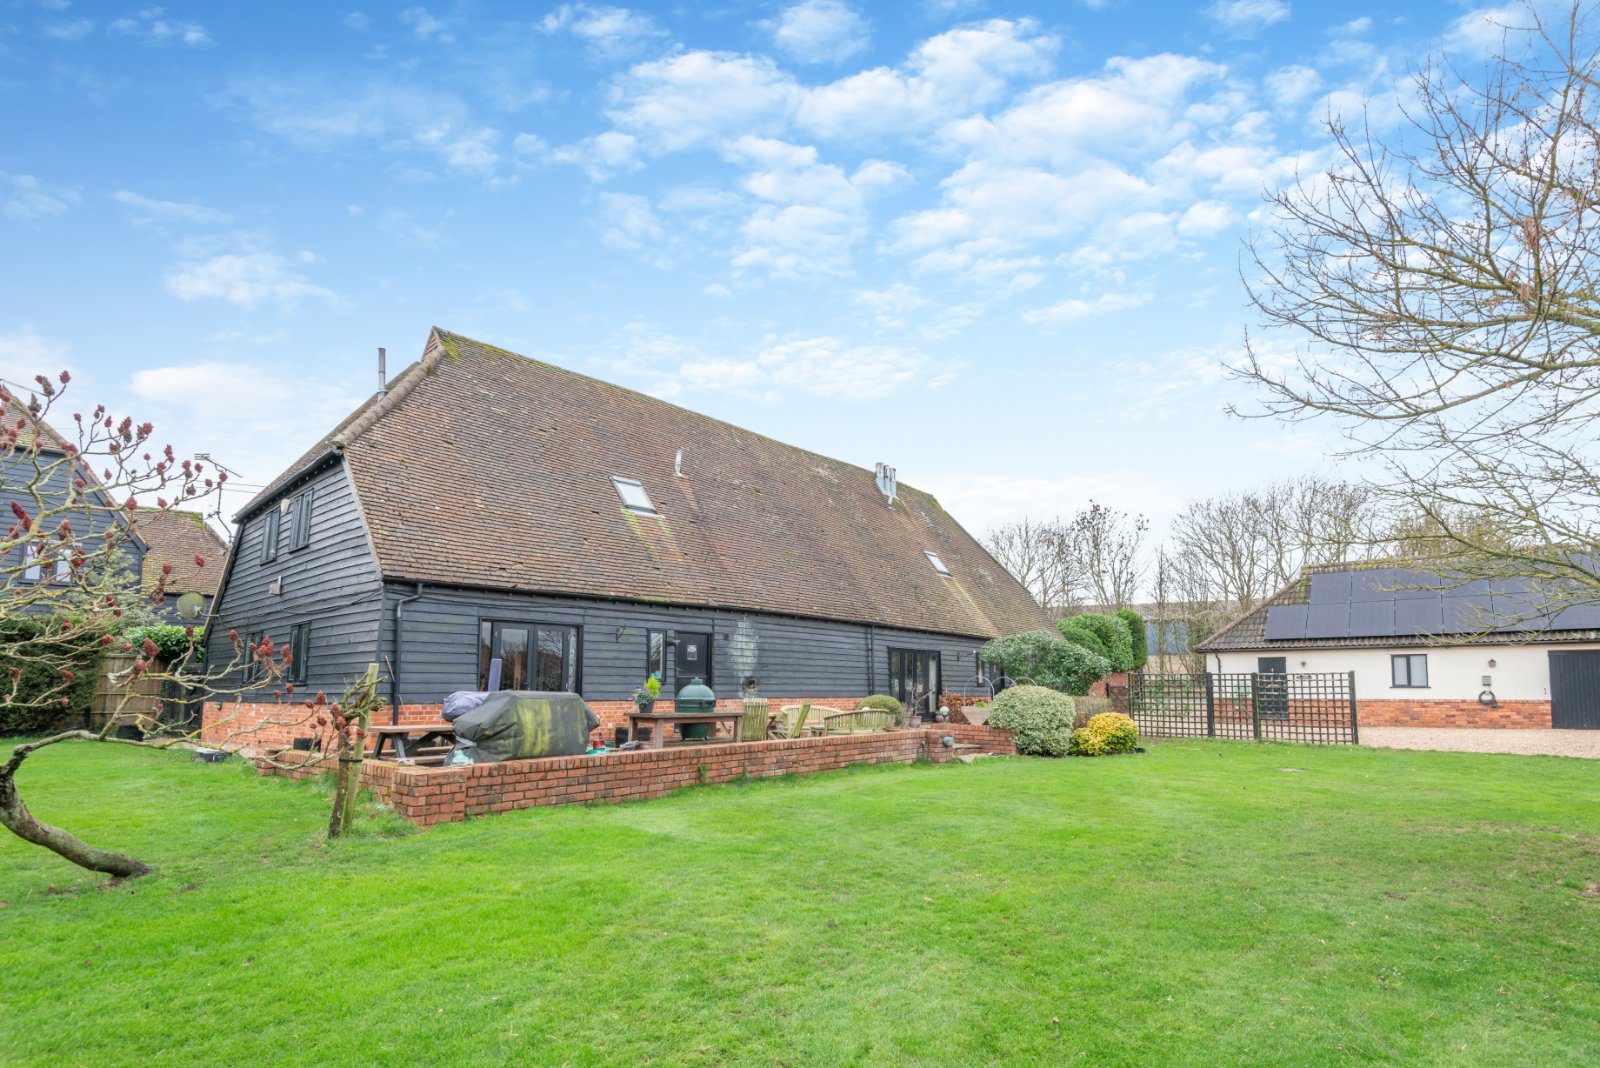 10 bedroom country house for sale in Haywards Heath